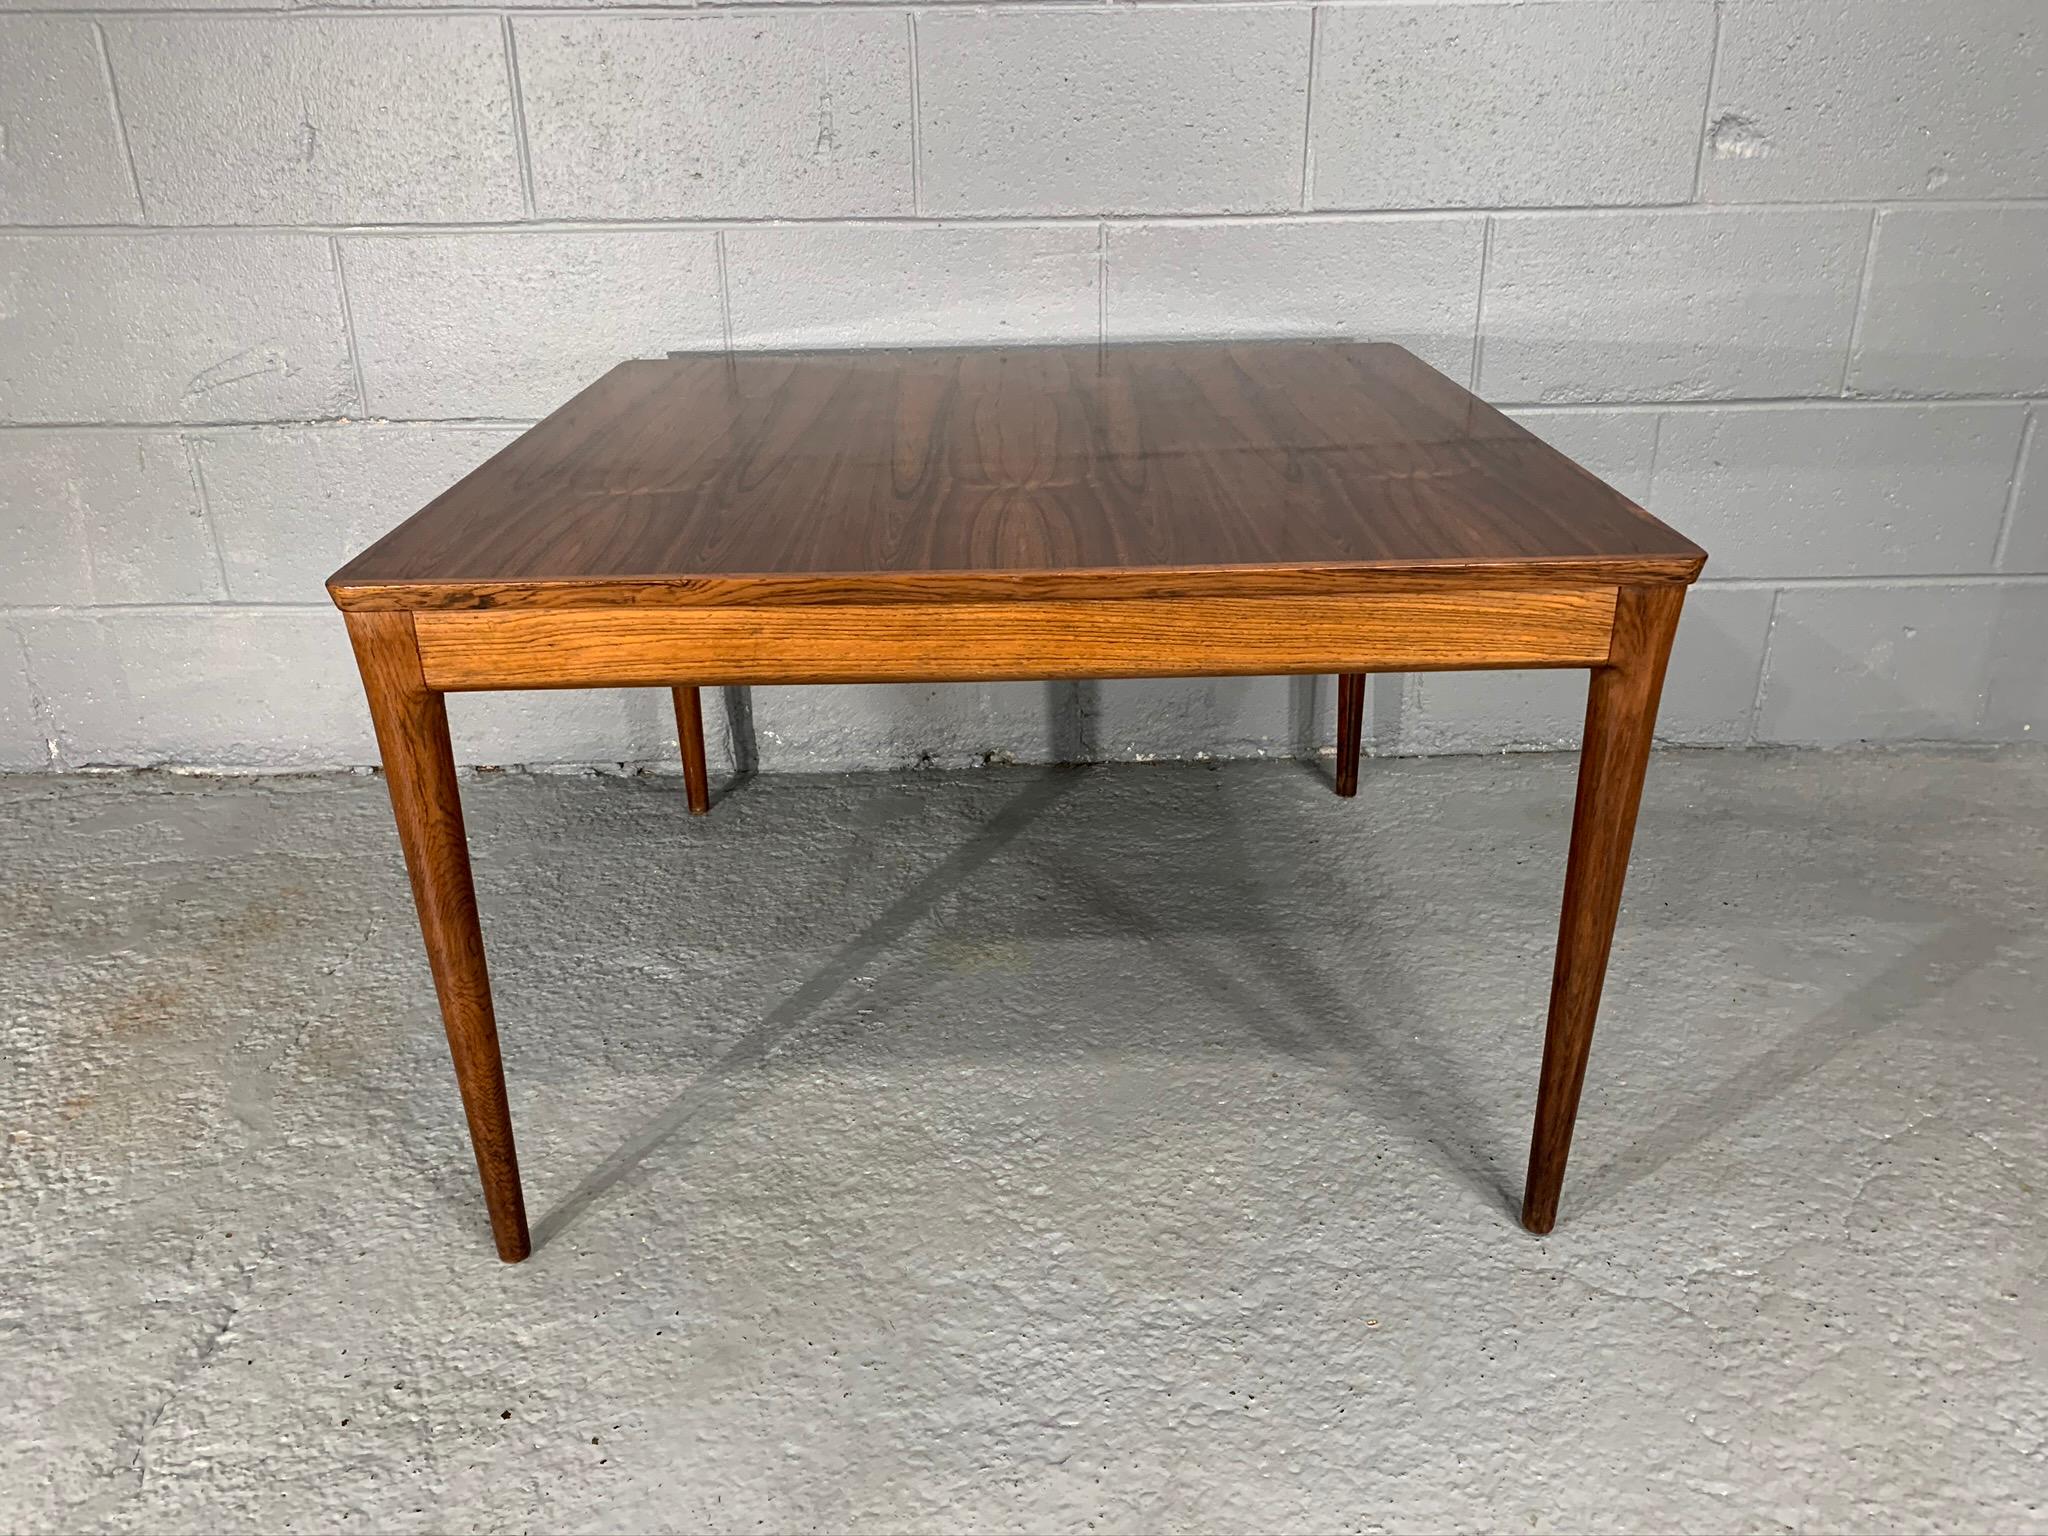 Square Danish modern midcentury rosewood coffee table by Uldum Møbelfabrik with UM made in Denmark foil label underneath piece.